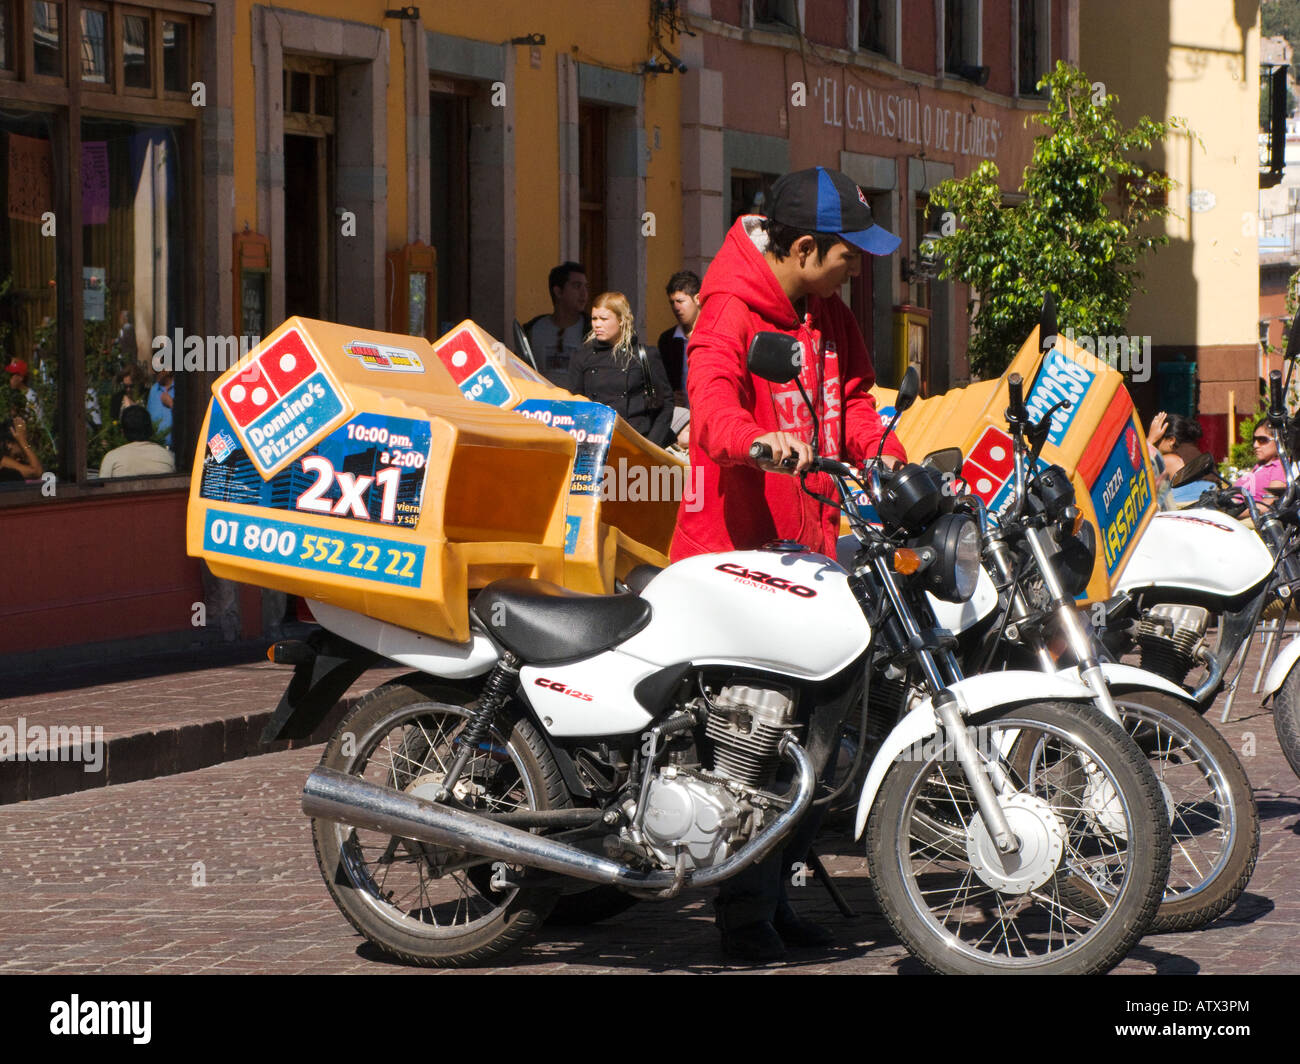 MEXICO Guanajuato Mexican teenage boy with motorcycle for Domino pizza delivery on city street Stock Photo